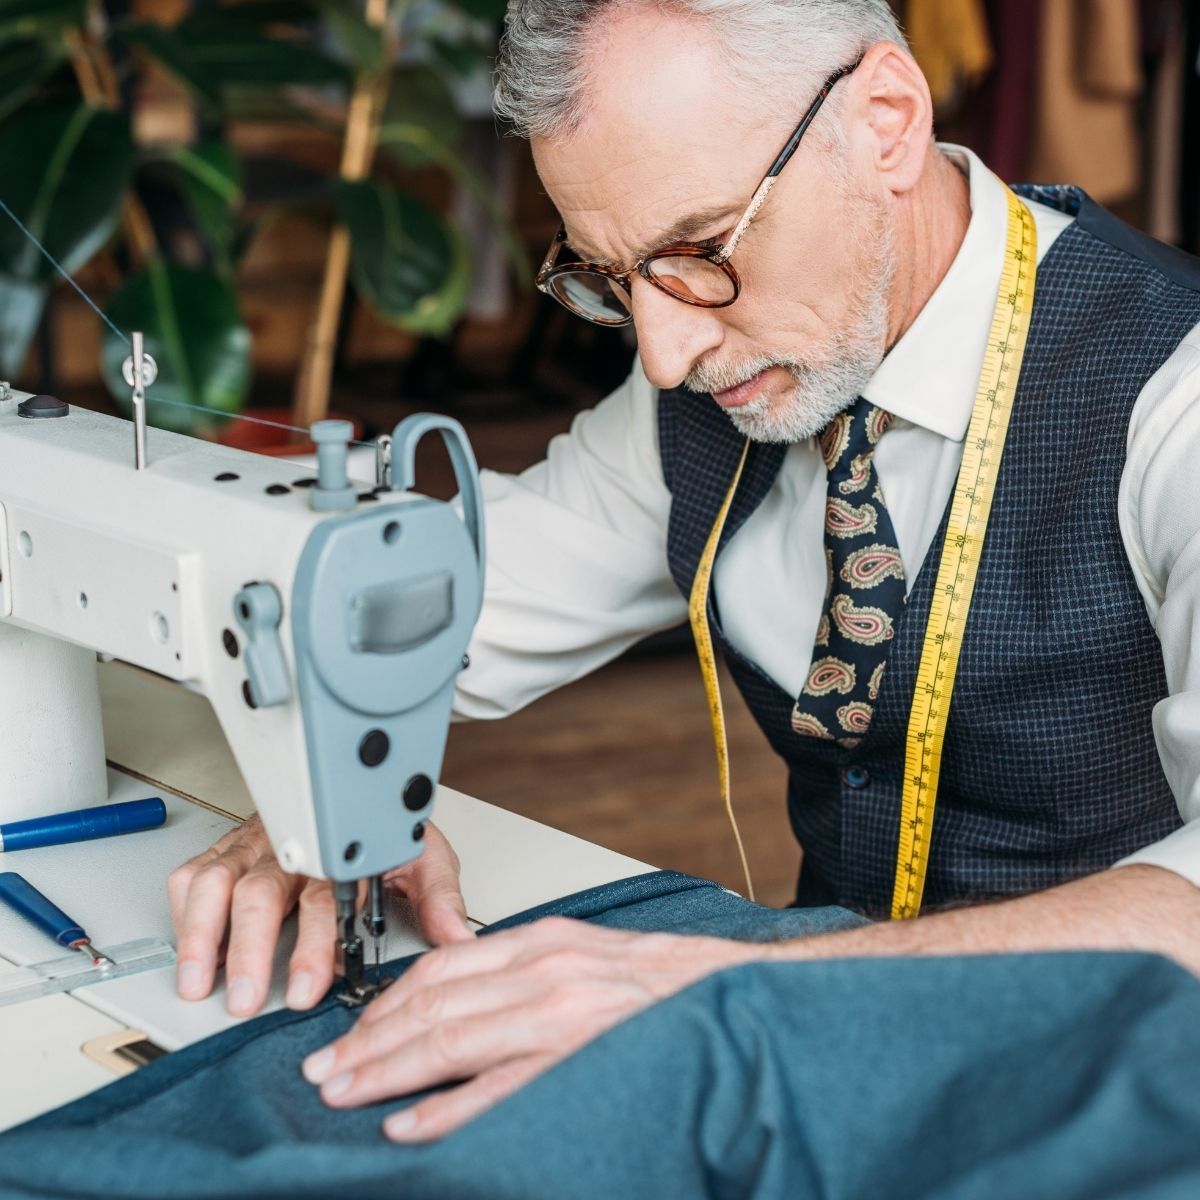 Learn tips for sewing safety